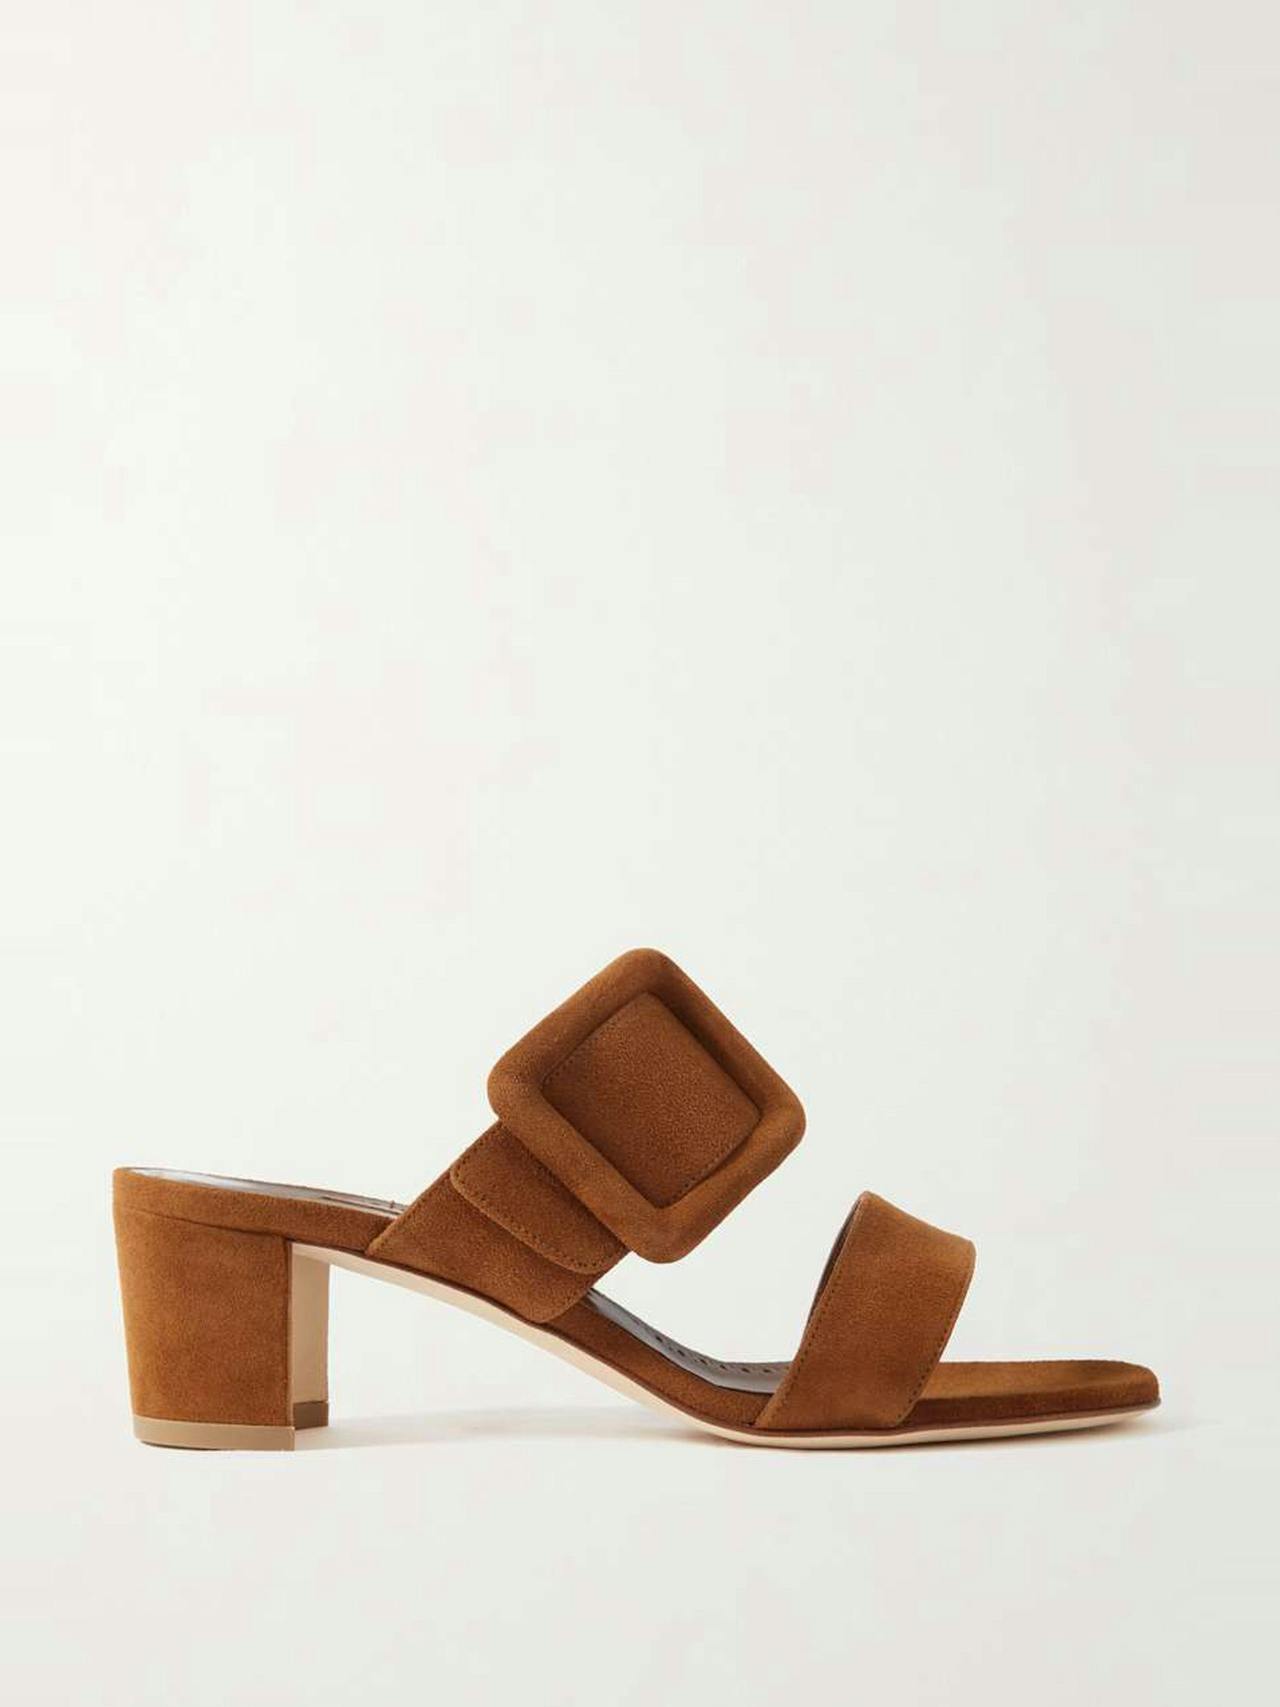 Titubanew 50 buckled suede sandals